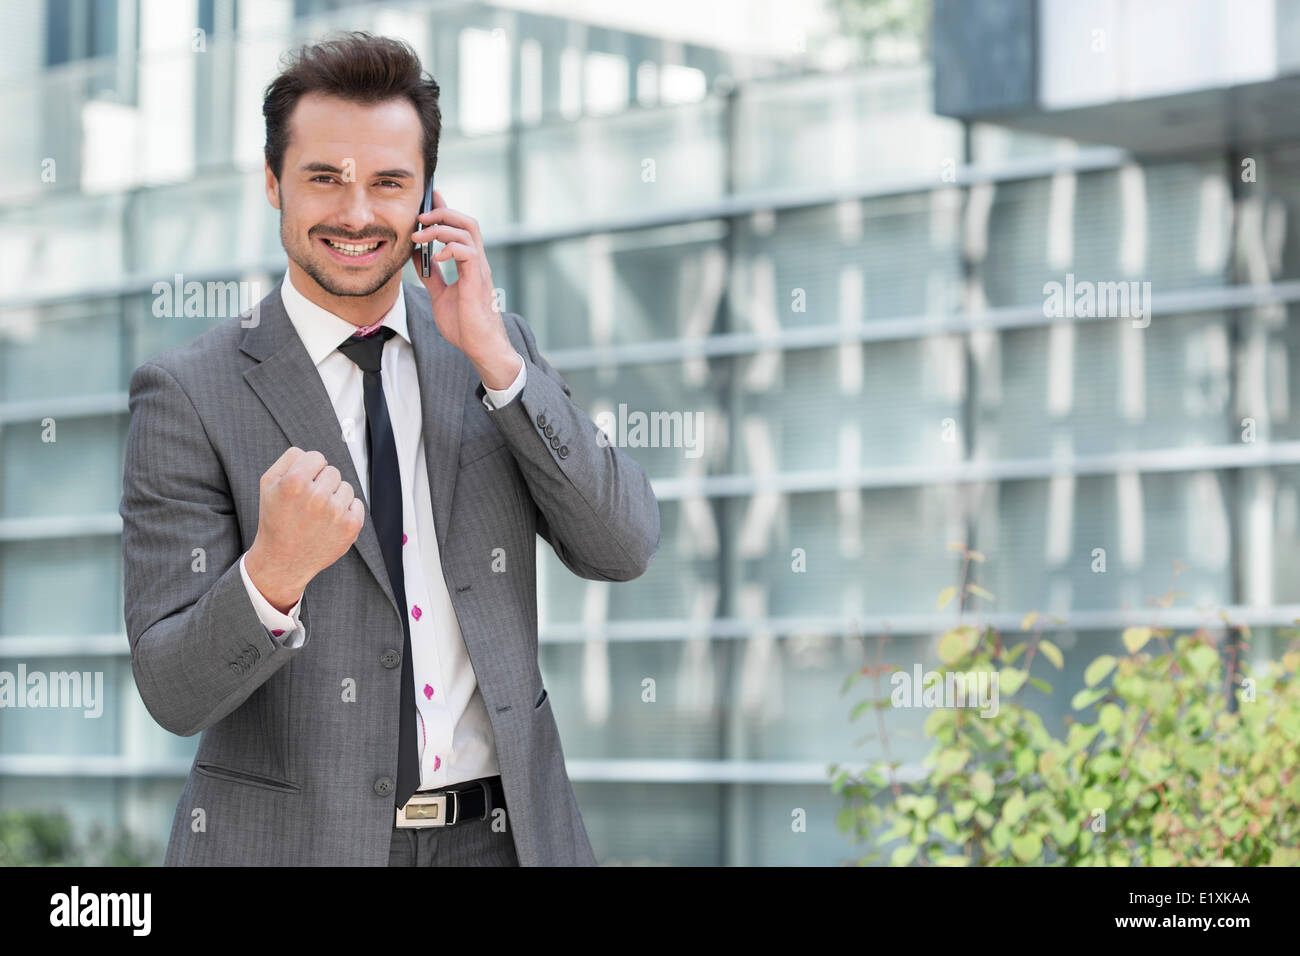 Portrait of successful young businessman using cell phone against office building Stock Photo